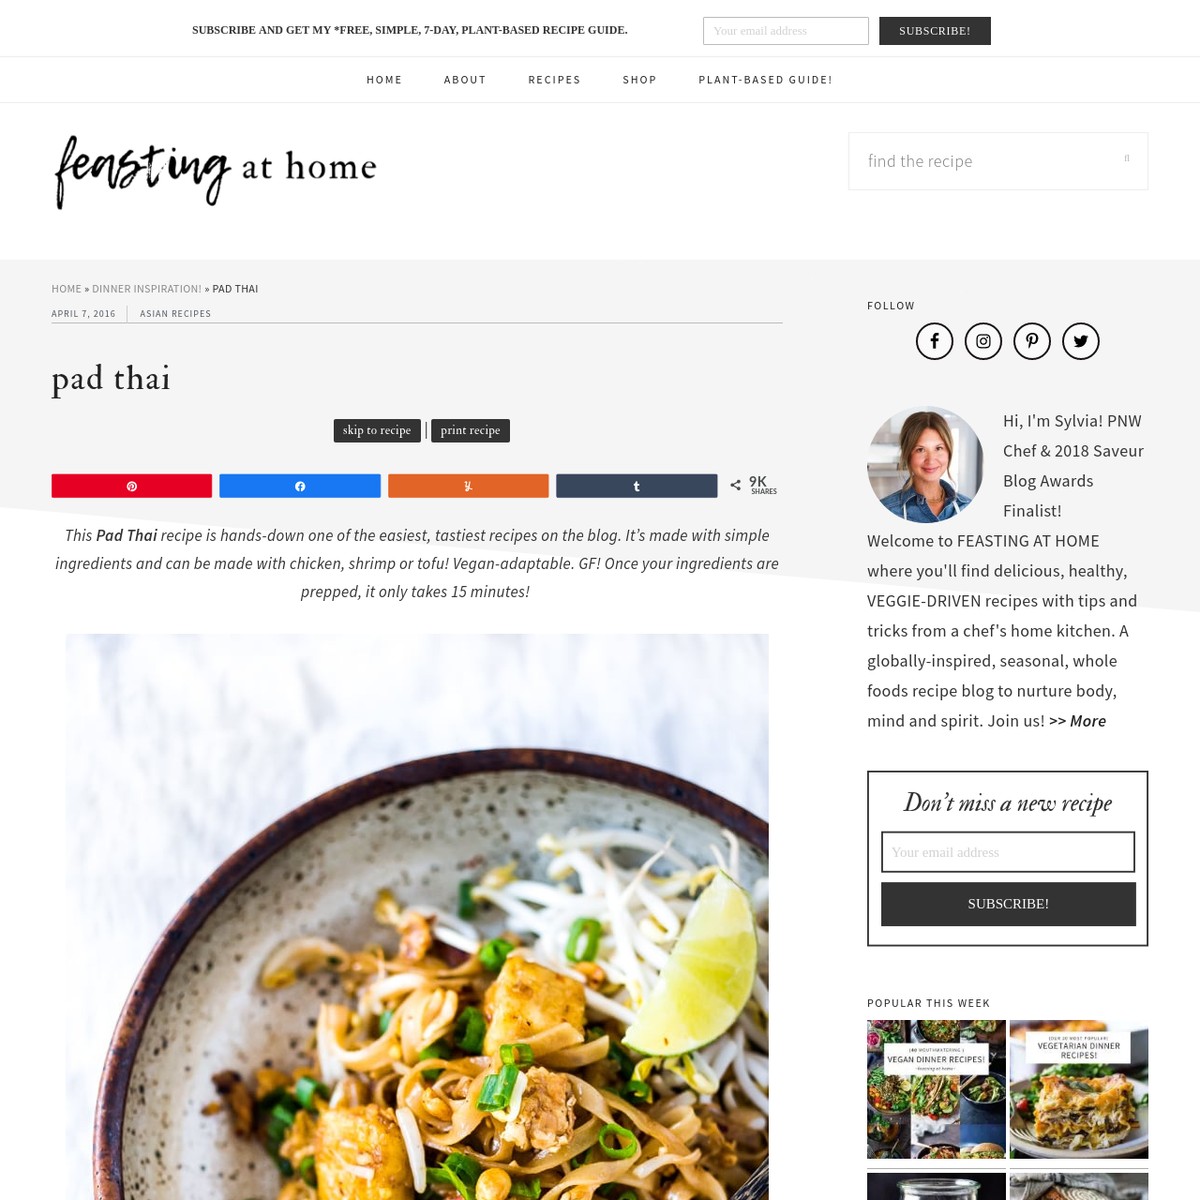 BEST-EVER Pad Thai Recipe! | Feasting at Home — Are.na